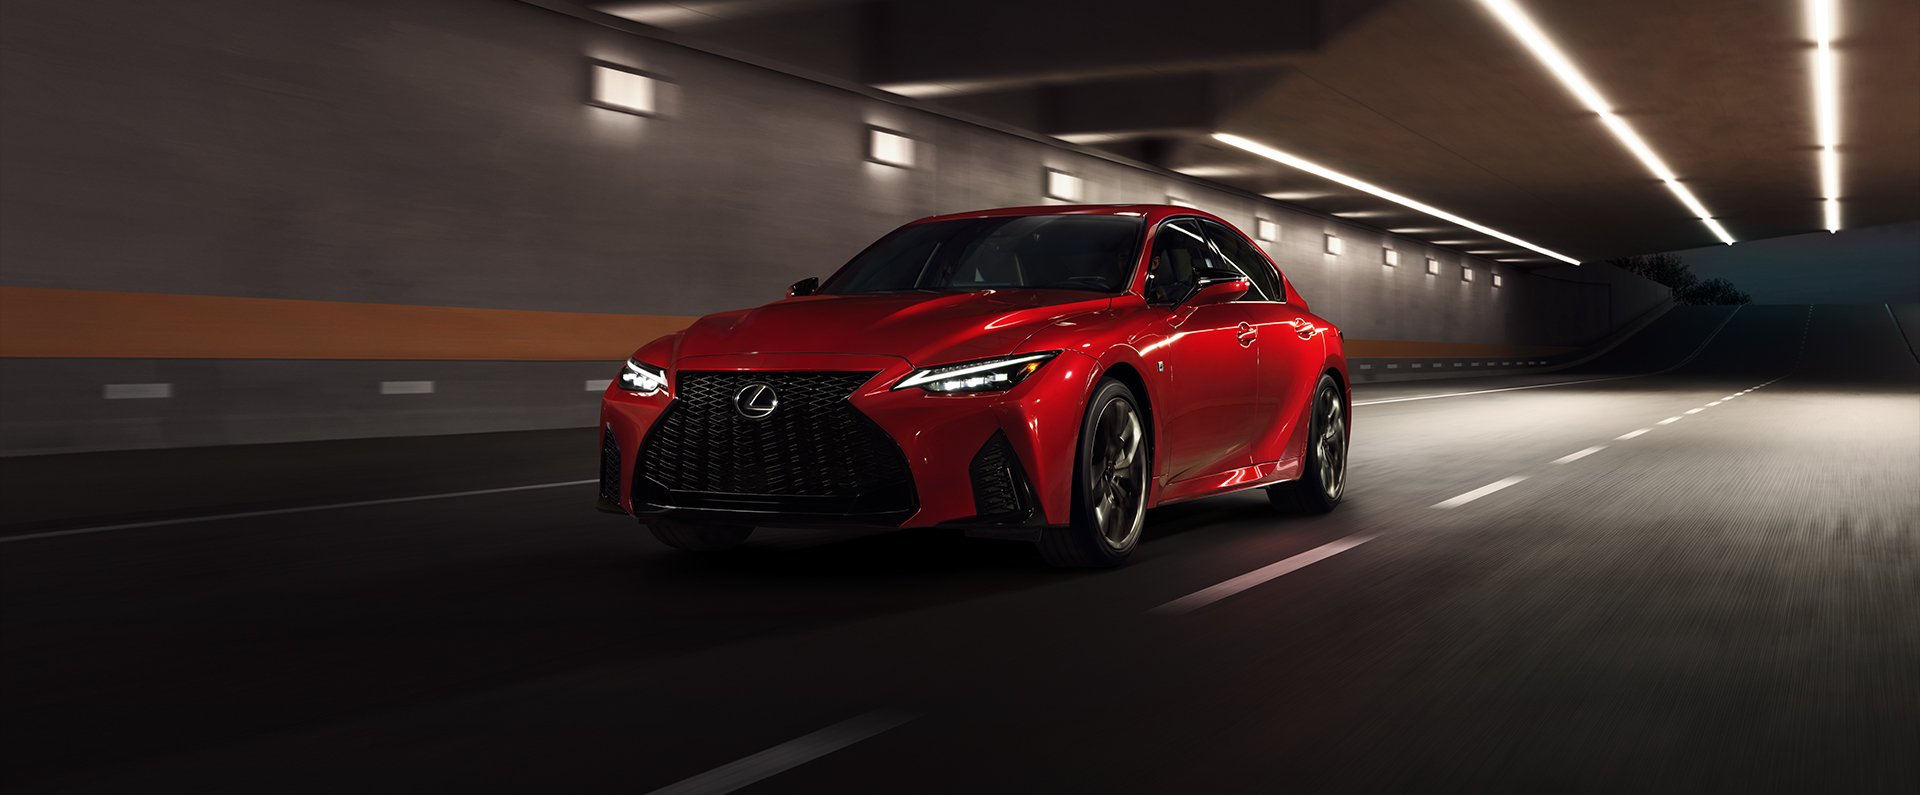 Toyota, Lexus, and Yamaha are working on a hydrogen-burning V-8